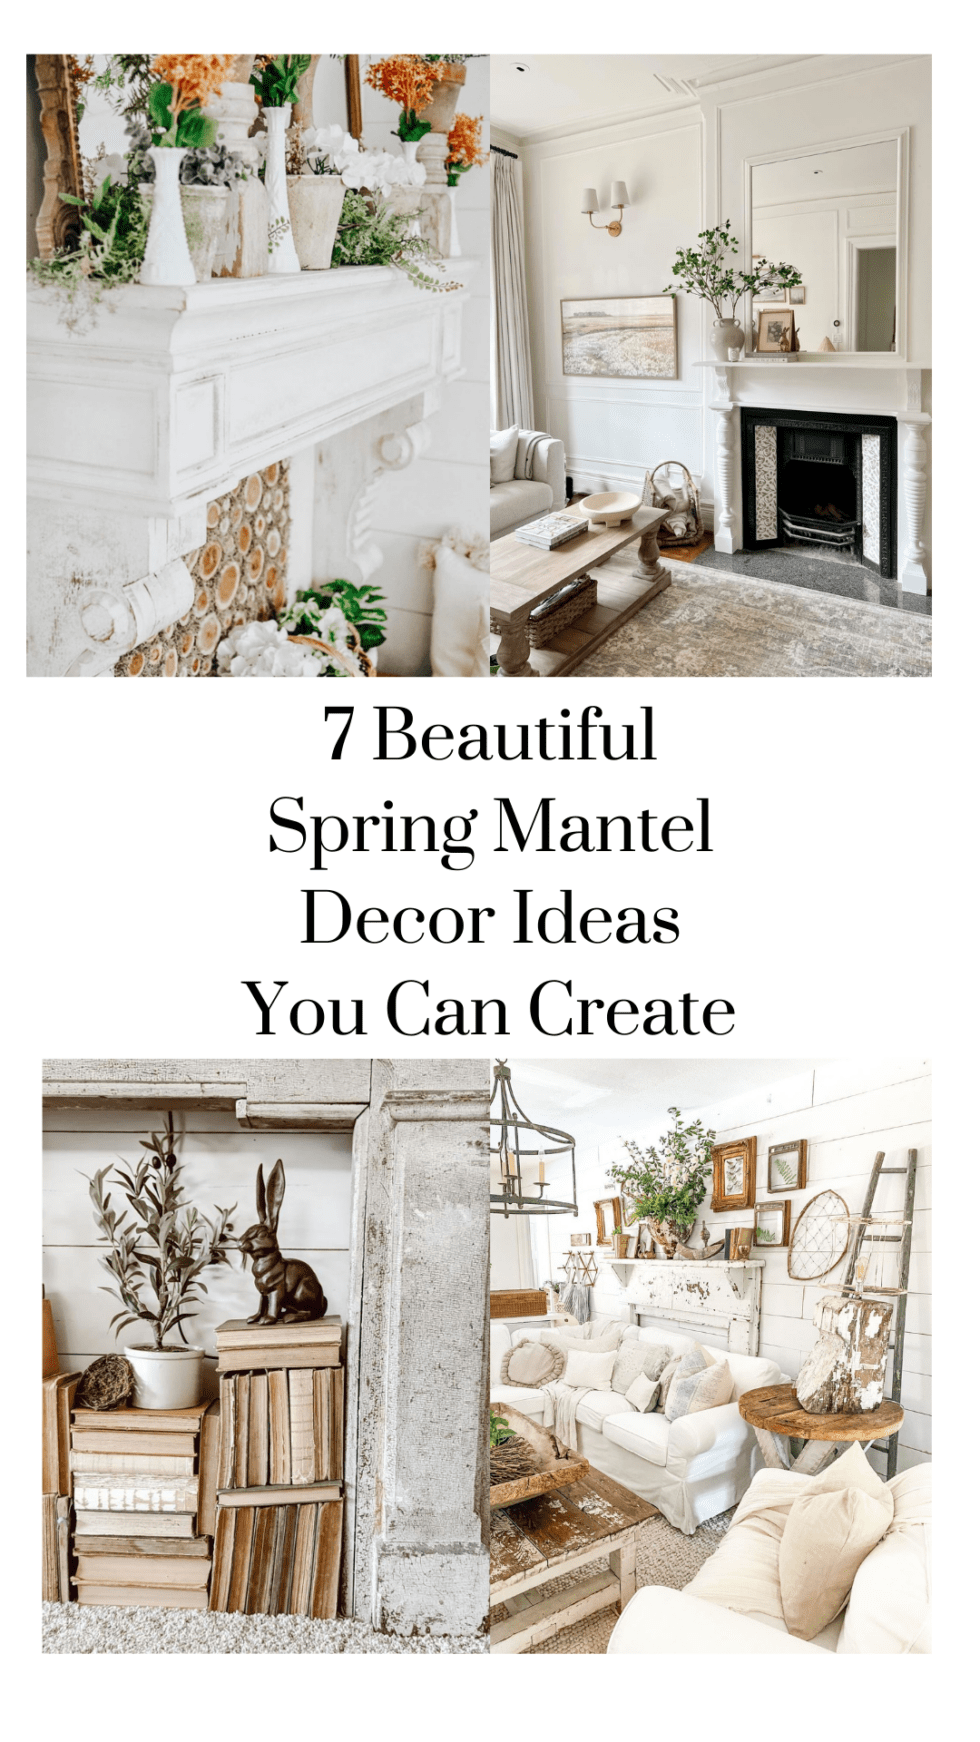 7 Beautiful Spring Mantel Decor Ideas You Can Create - Robyn's French Nest